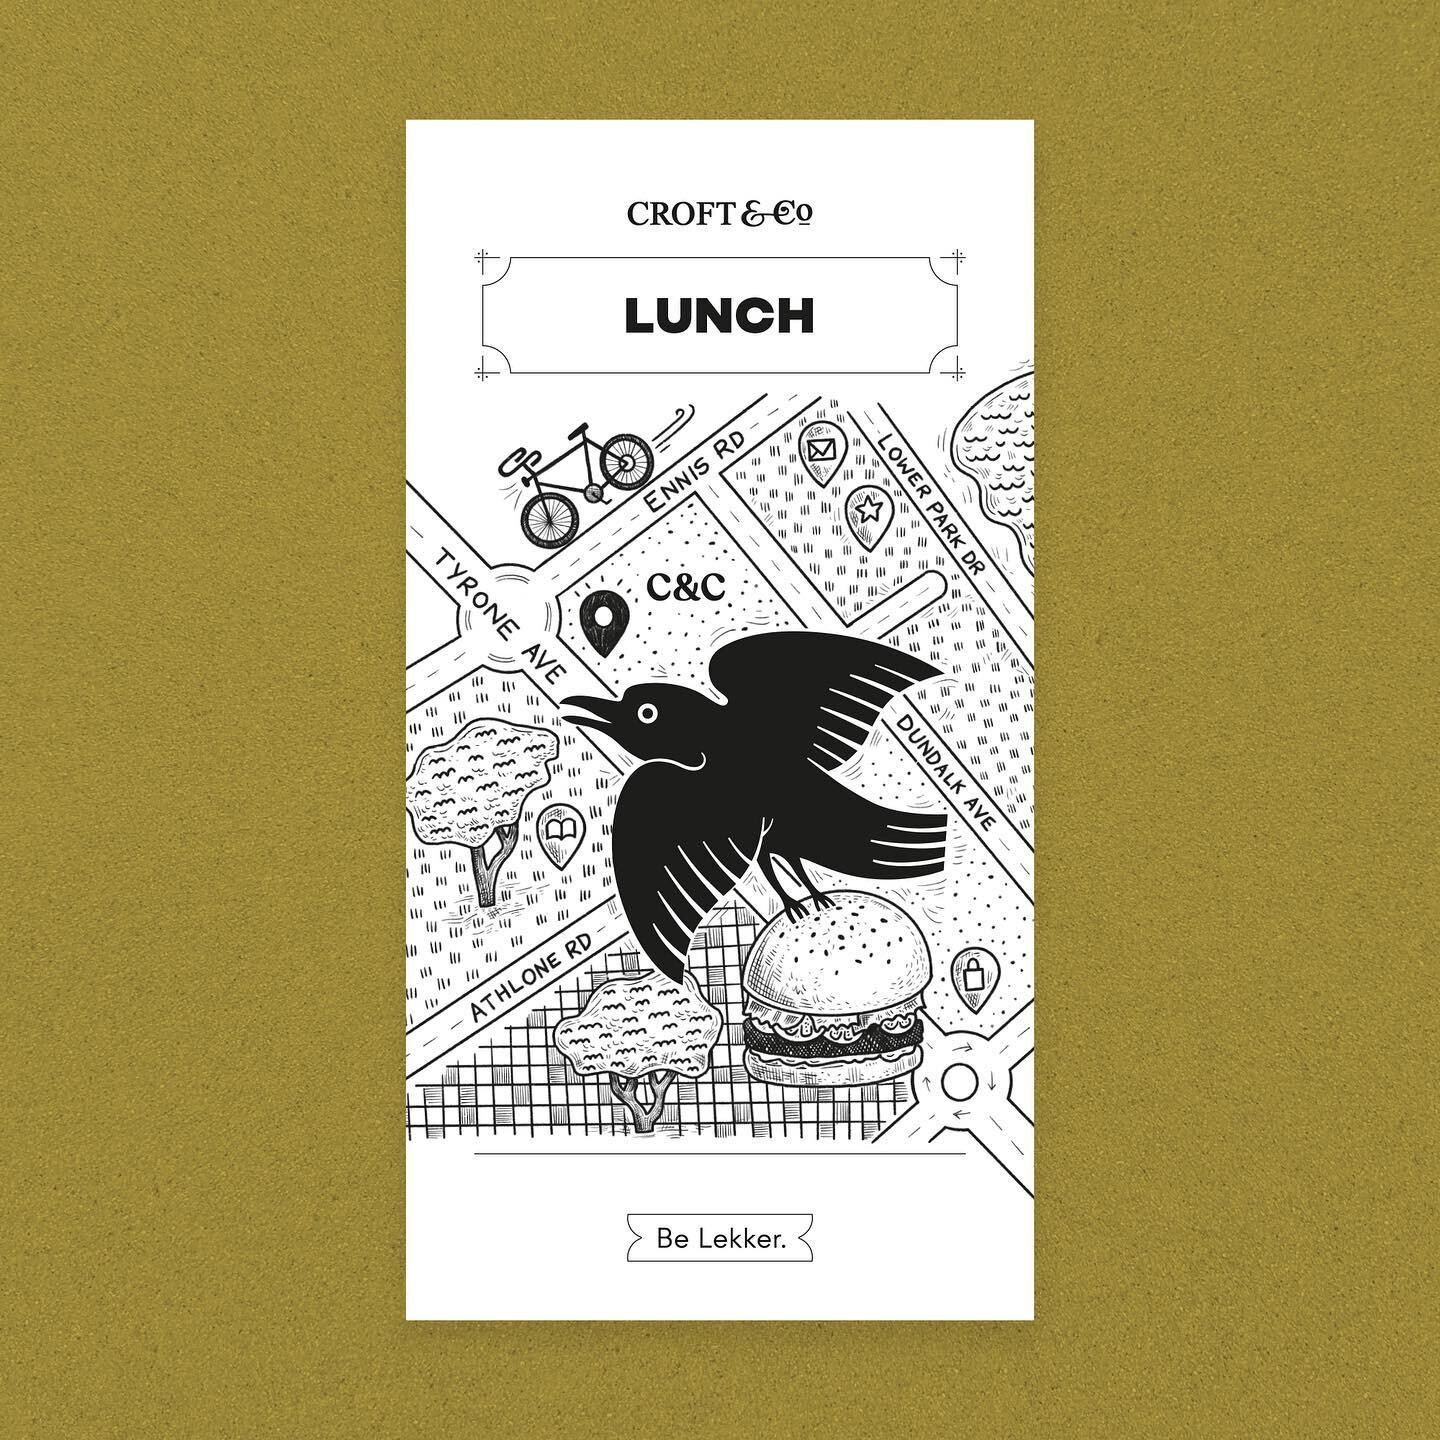 Here is the new lunch menu design for @croftandco, featuring the raven flying over Parkview. @croftandco has some yummy new items on both their menus! 

#menudesign #graphicdesign #raven #parkview #layoutdesign #lunch #burger #foodillustration #paper